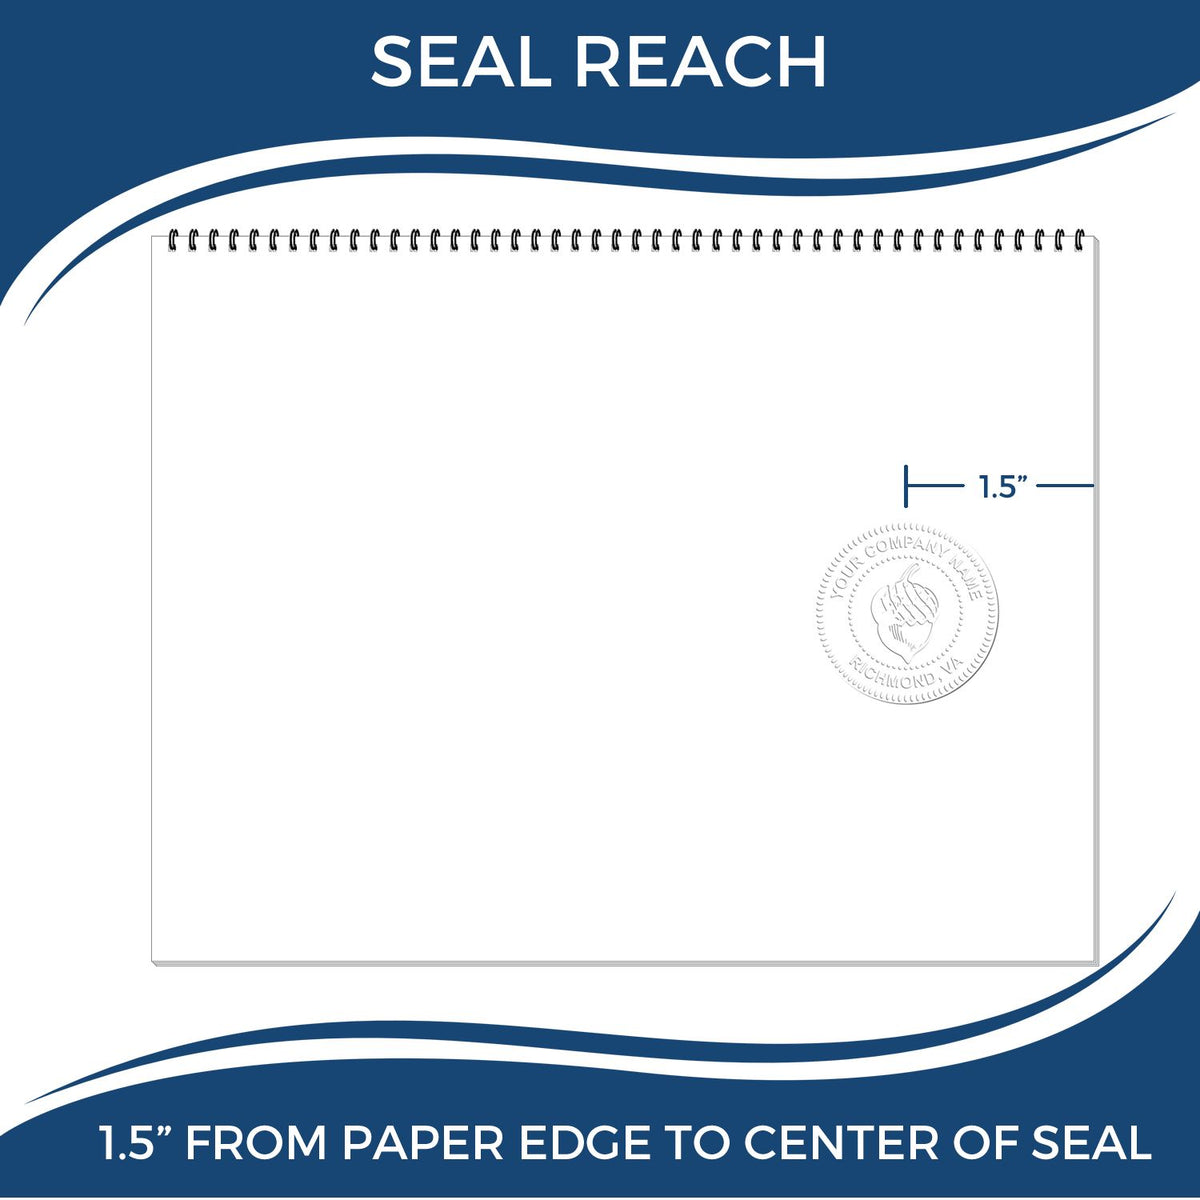 An infographic showing the seal reach which is represented by a ruler and a miniature seal image of the Gift Maryland Architect Seal